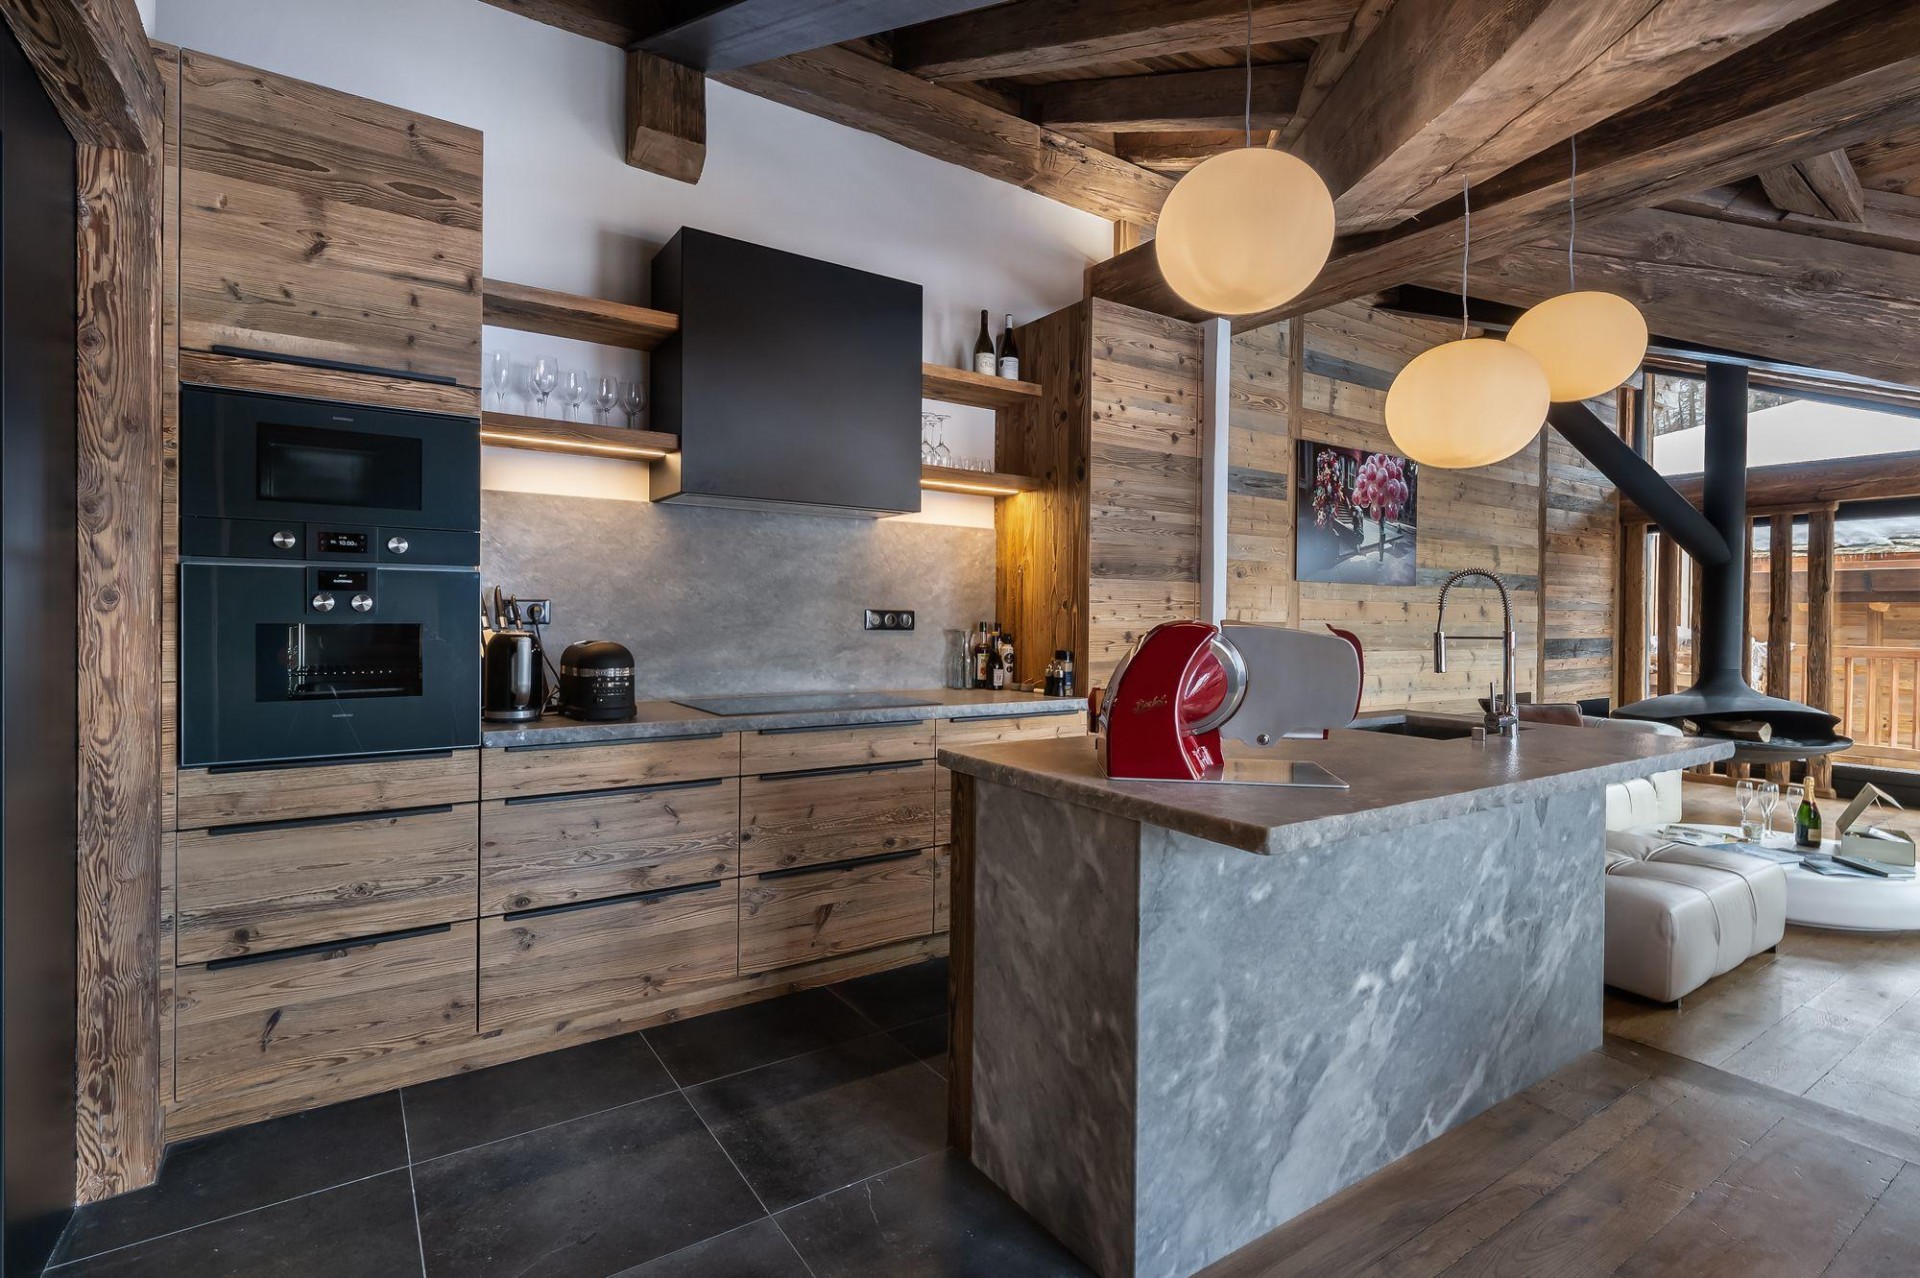 val-d-isere-location-chalet-luxe-tapizaso